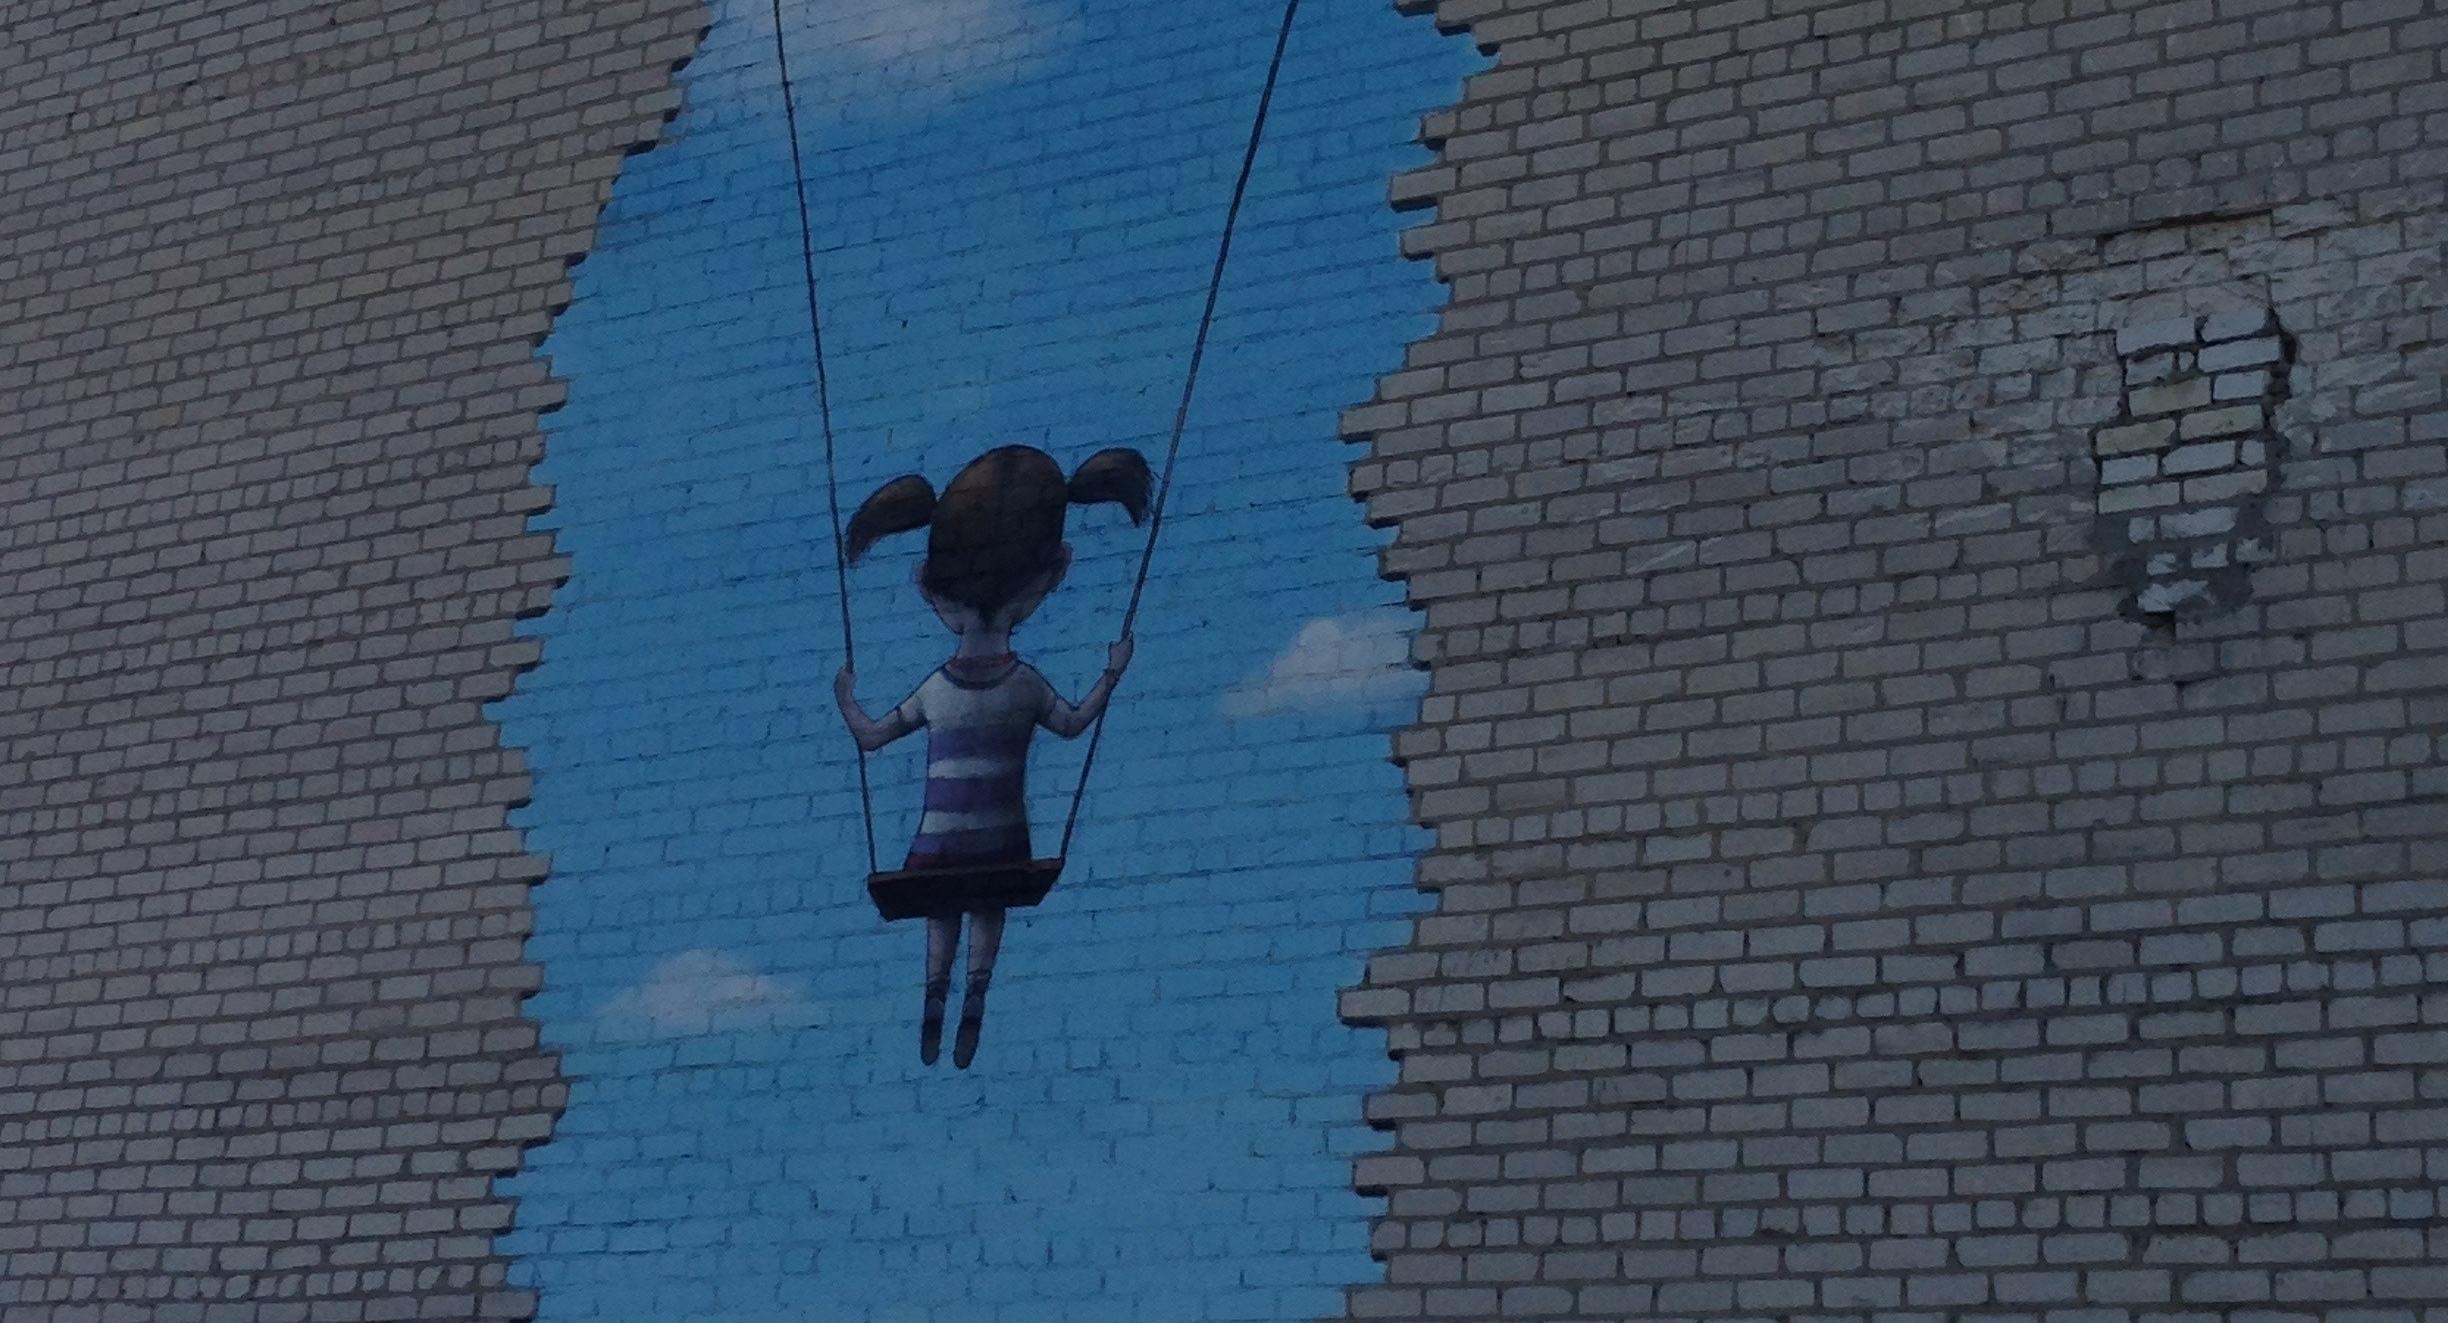 A repaired brick wall with a painted picture of a girl on a swing